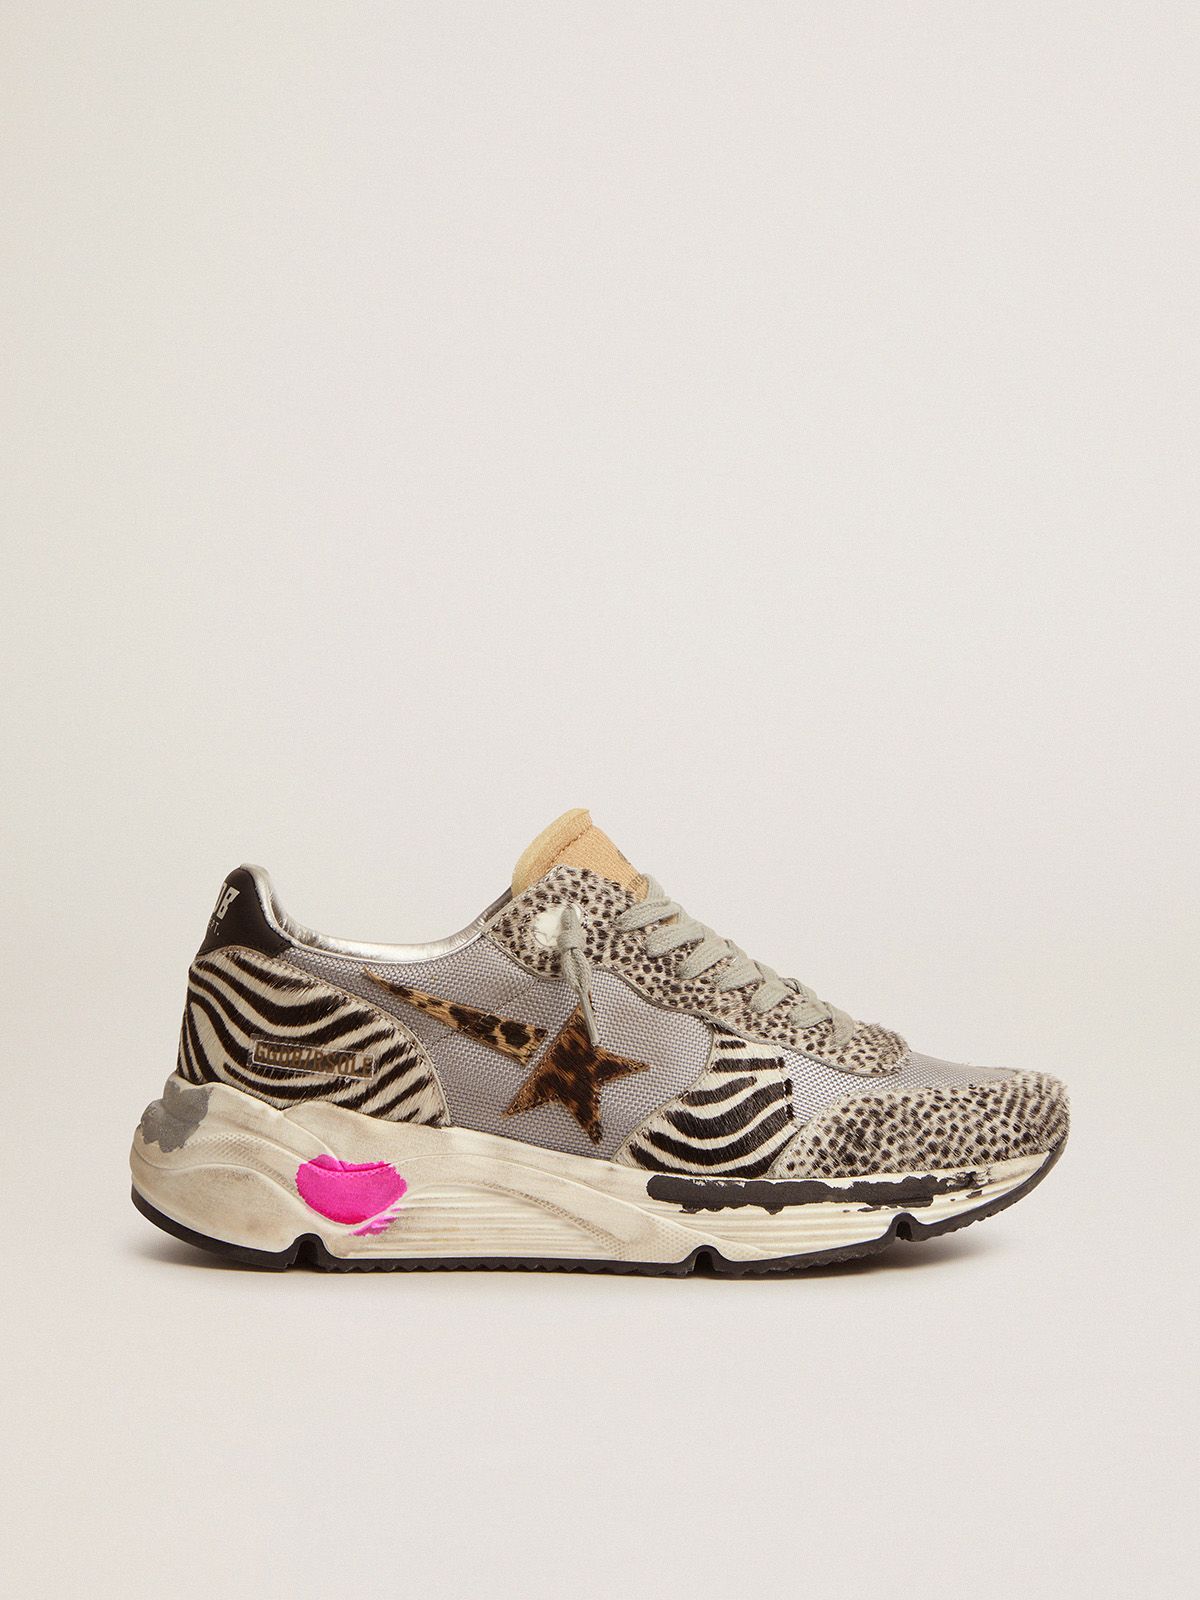 Golden Goose Ball Star Uomo Running Sole sneakers in mesh and animal-print pony skin